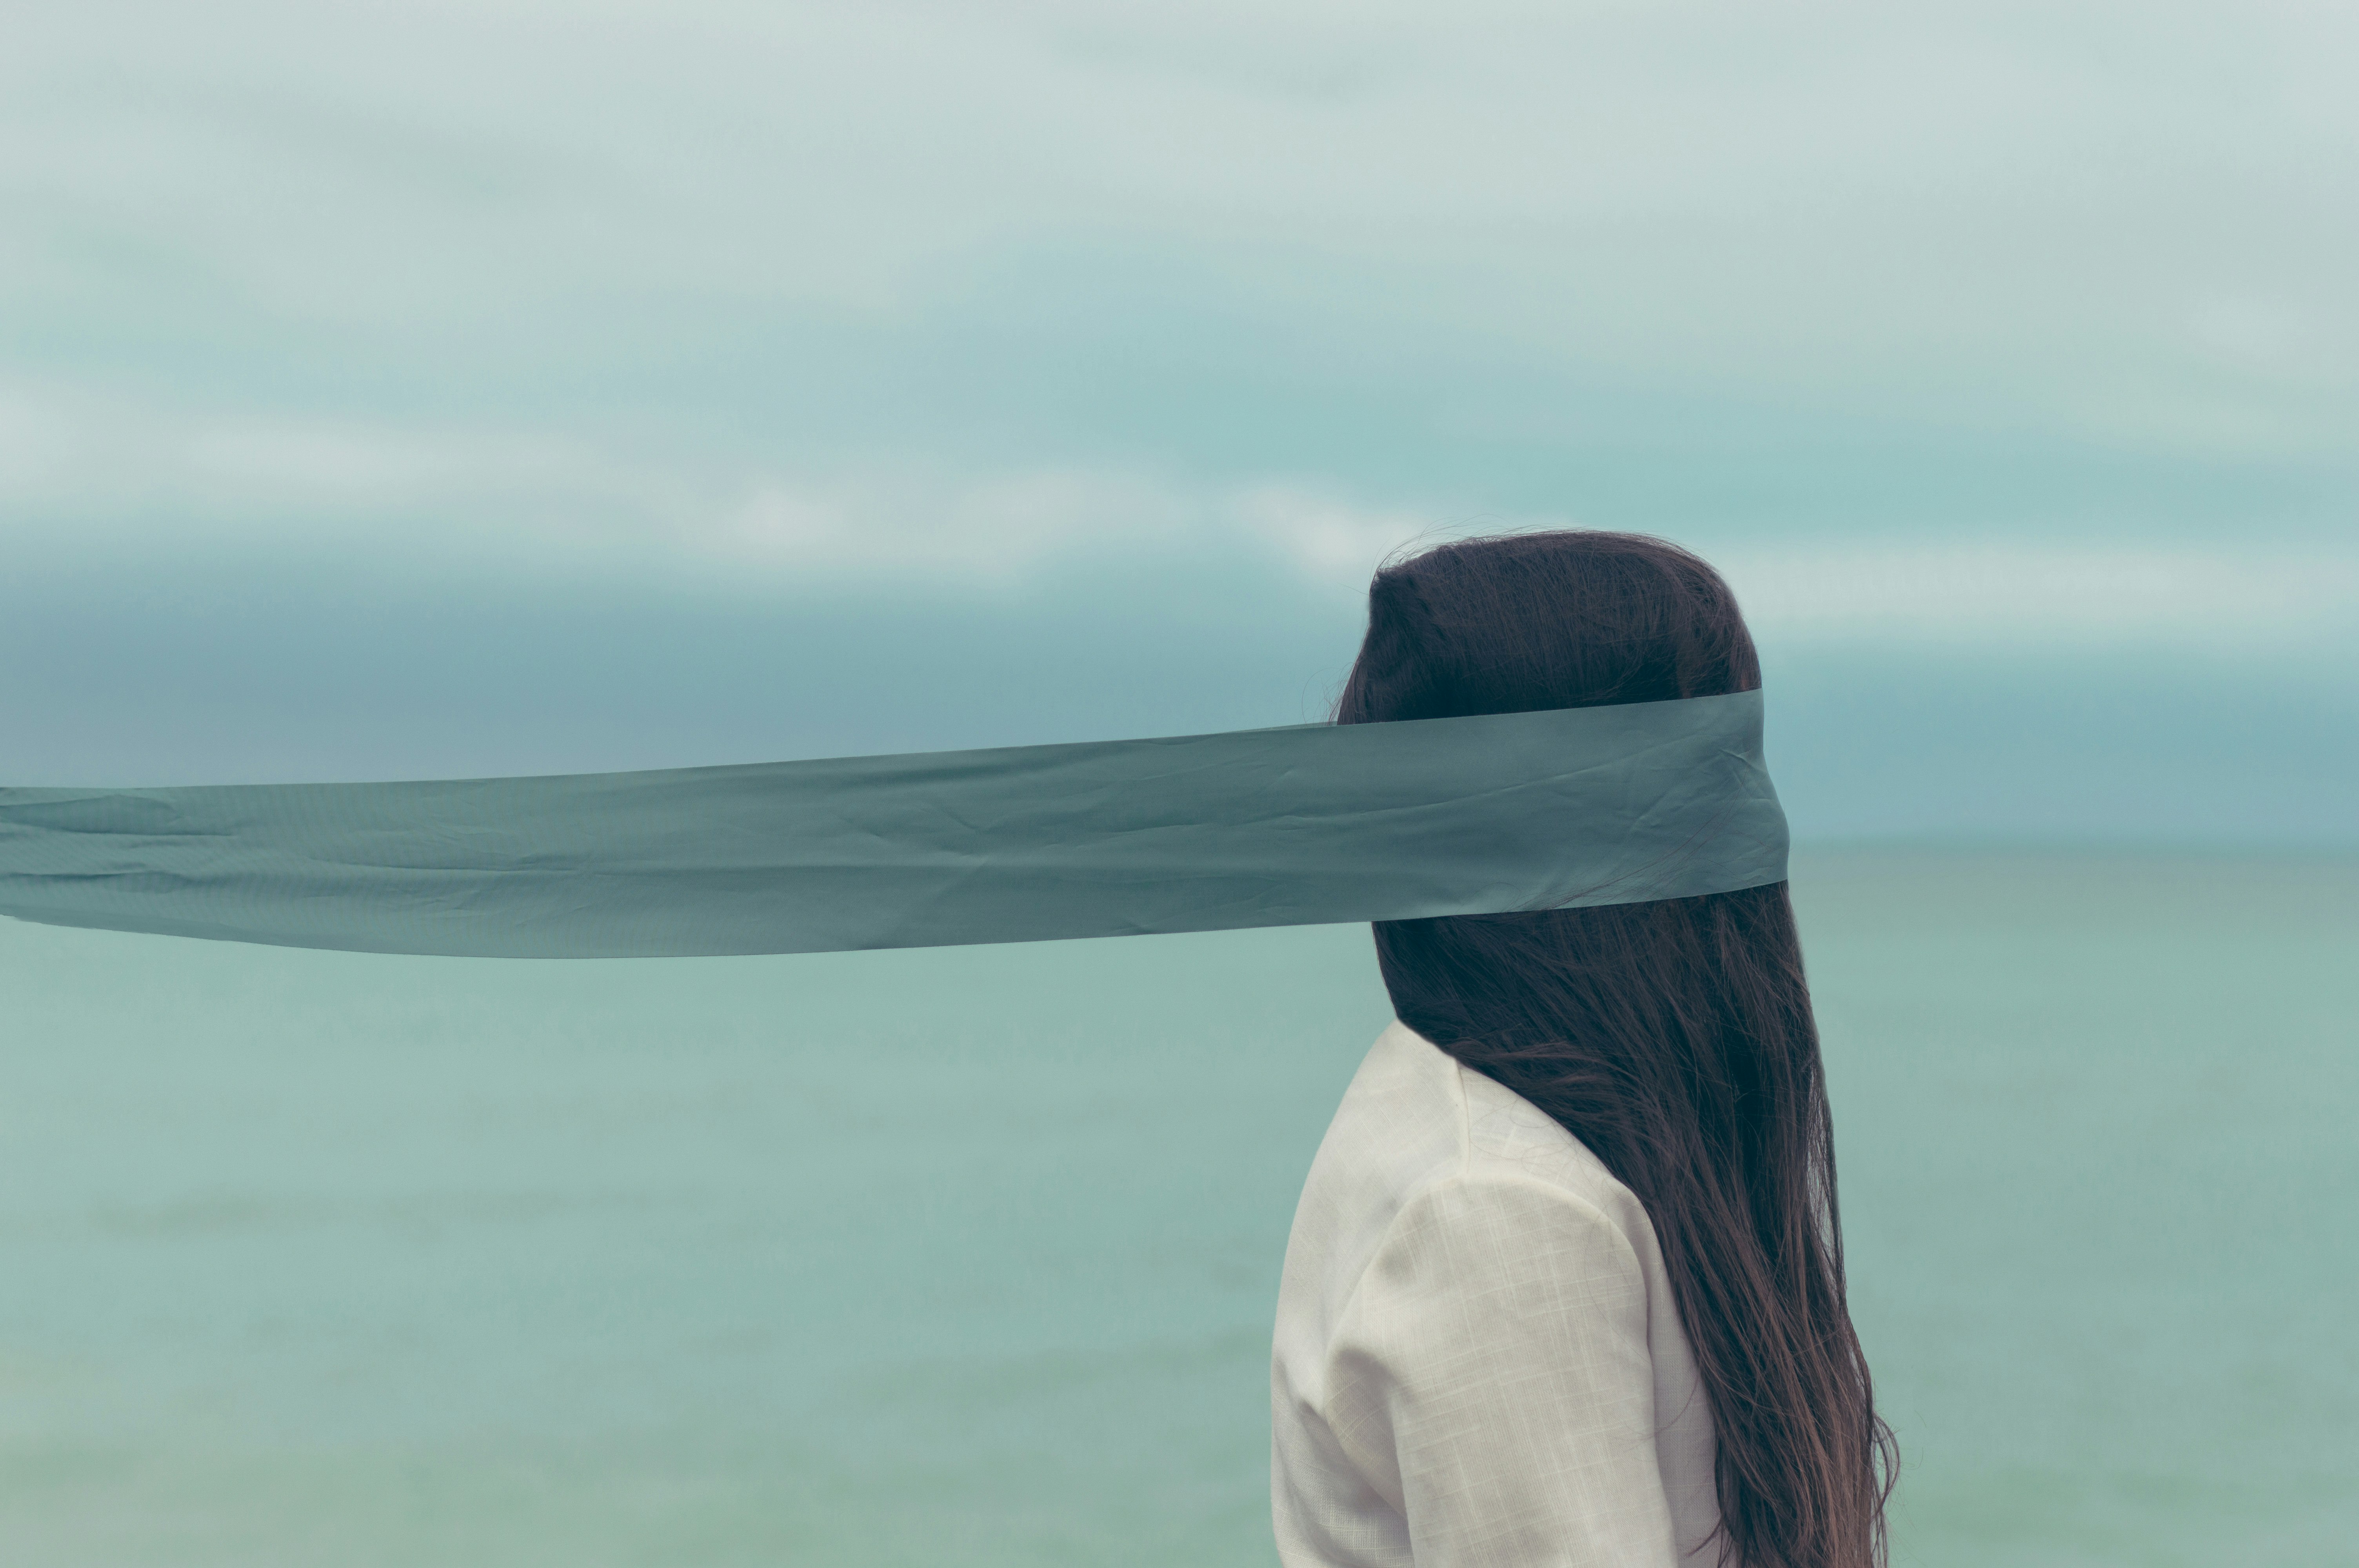 An image of a person with long brown hair and a white shirt. Around this person's head is a blue scarf. The arrangement of scarf and hair obscure the person's face, and it is unclear which direction they are facing. Behind is an open sky and expanse of water.